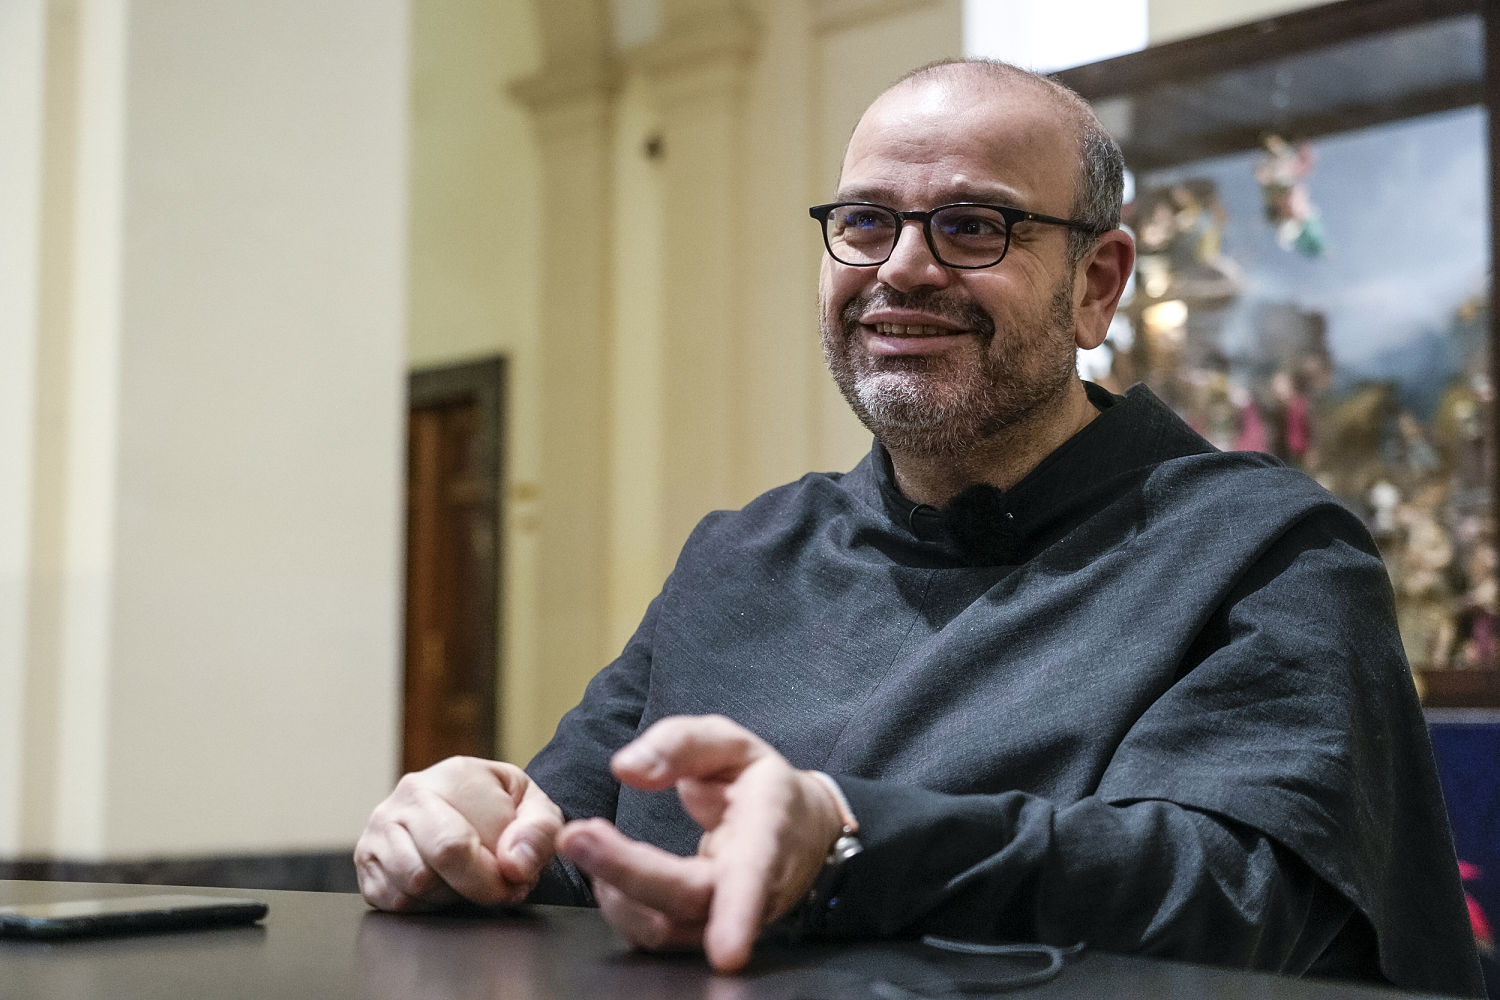 The Vatican's top expert on AI ethics is a friar from a medieval Franciscan order   